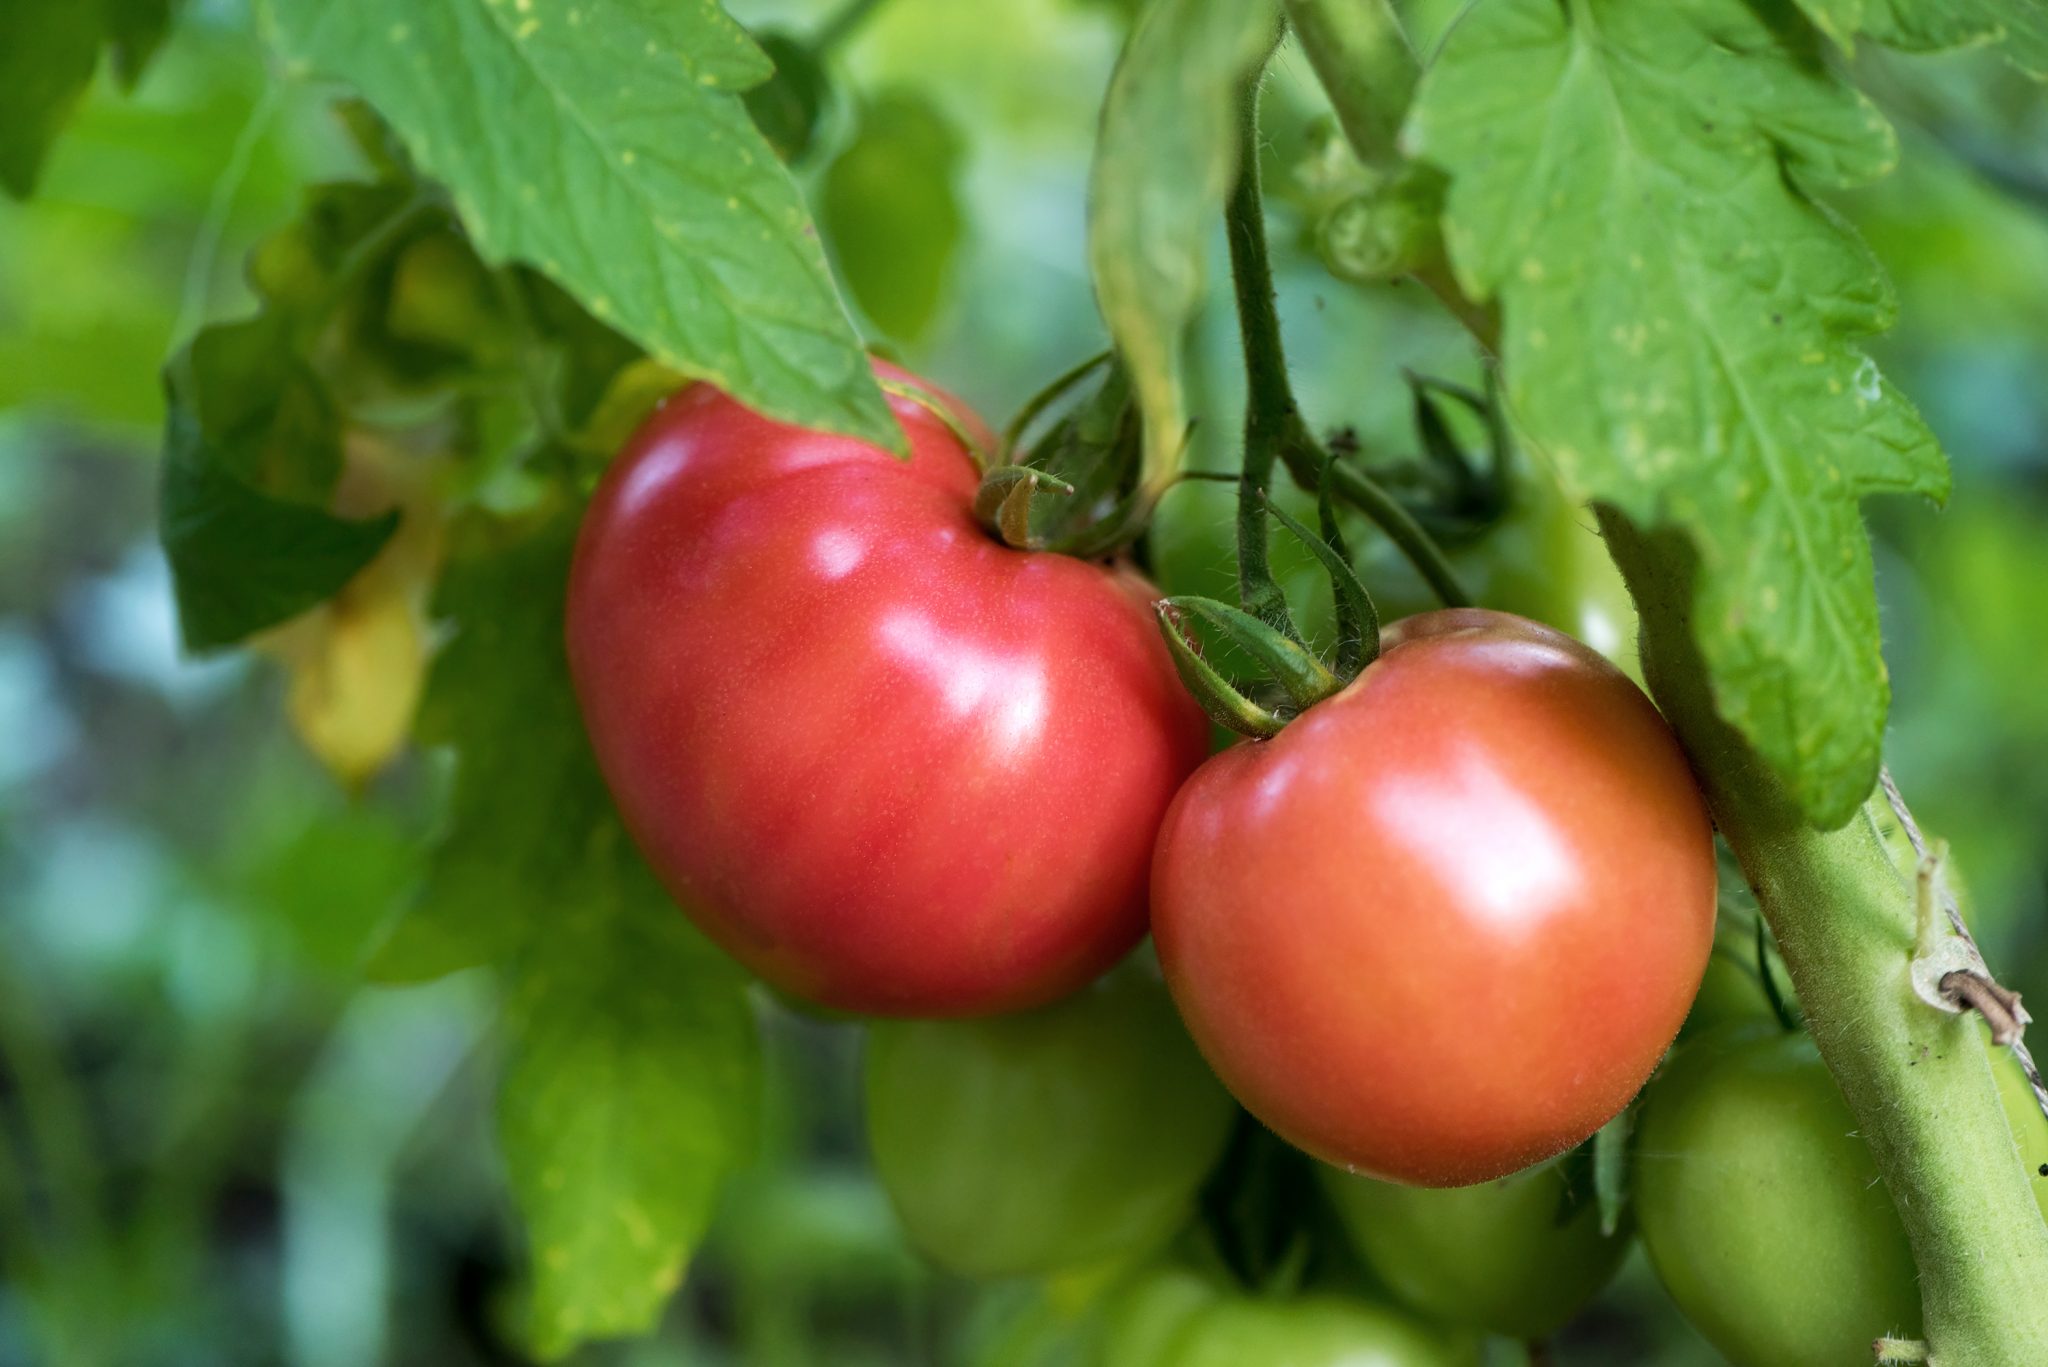 Tips to Grow Tomatoes From An Expert in Hot and Humid Climates: Advice from Alabama Gardener Bill